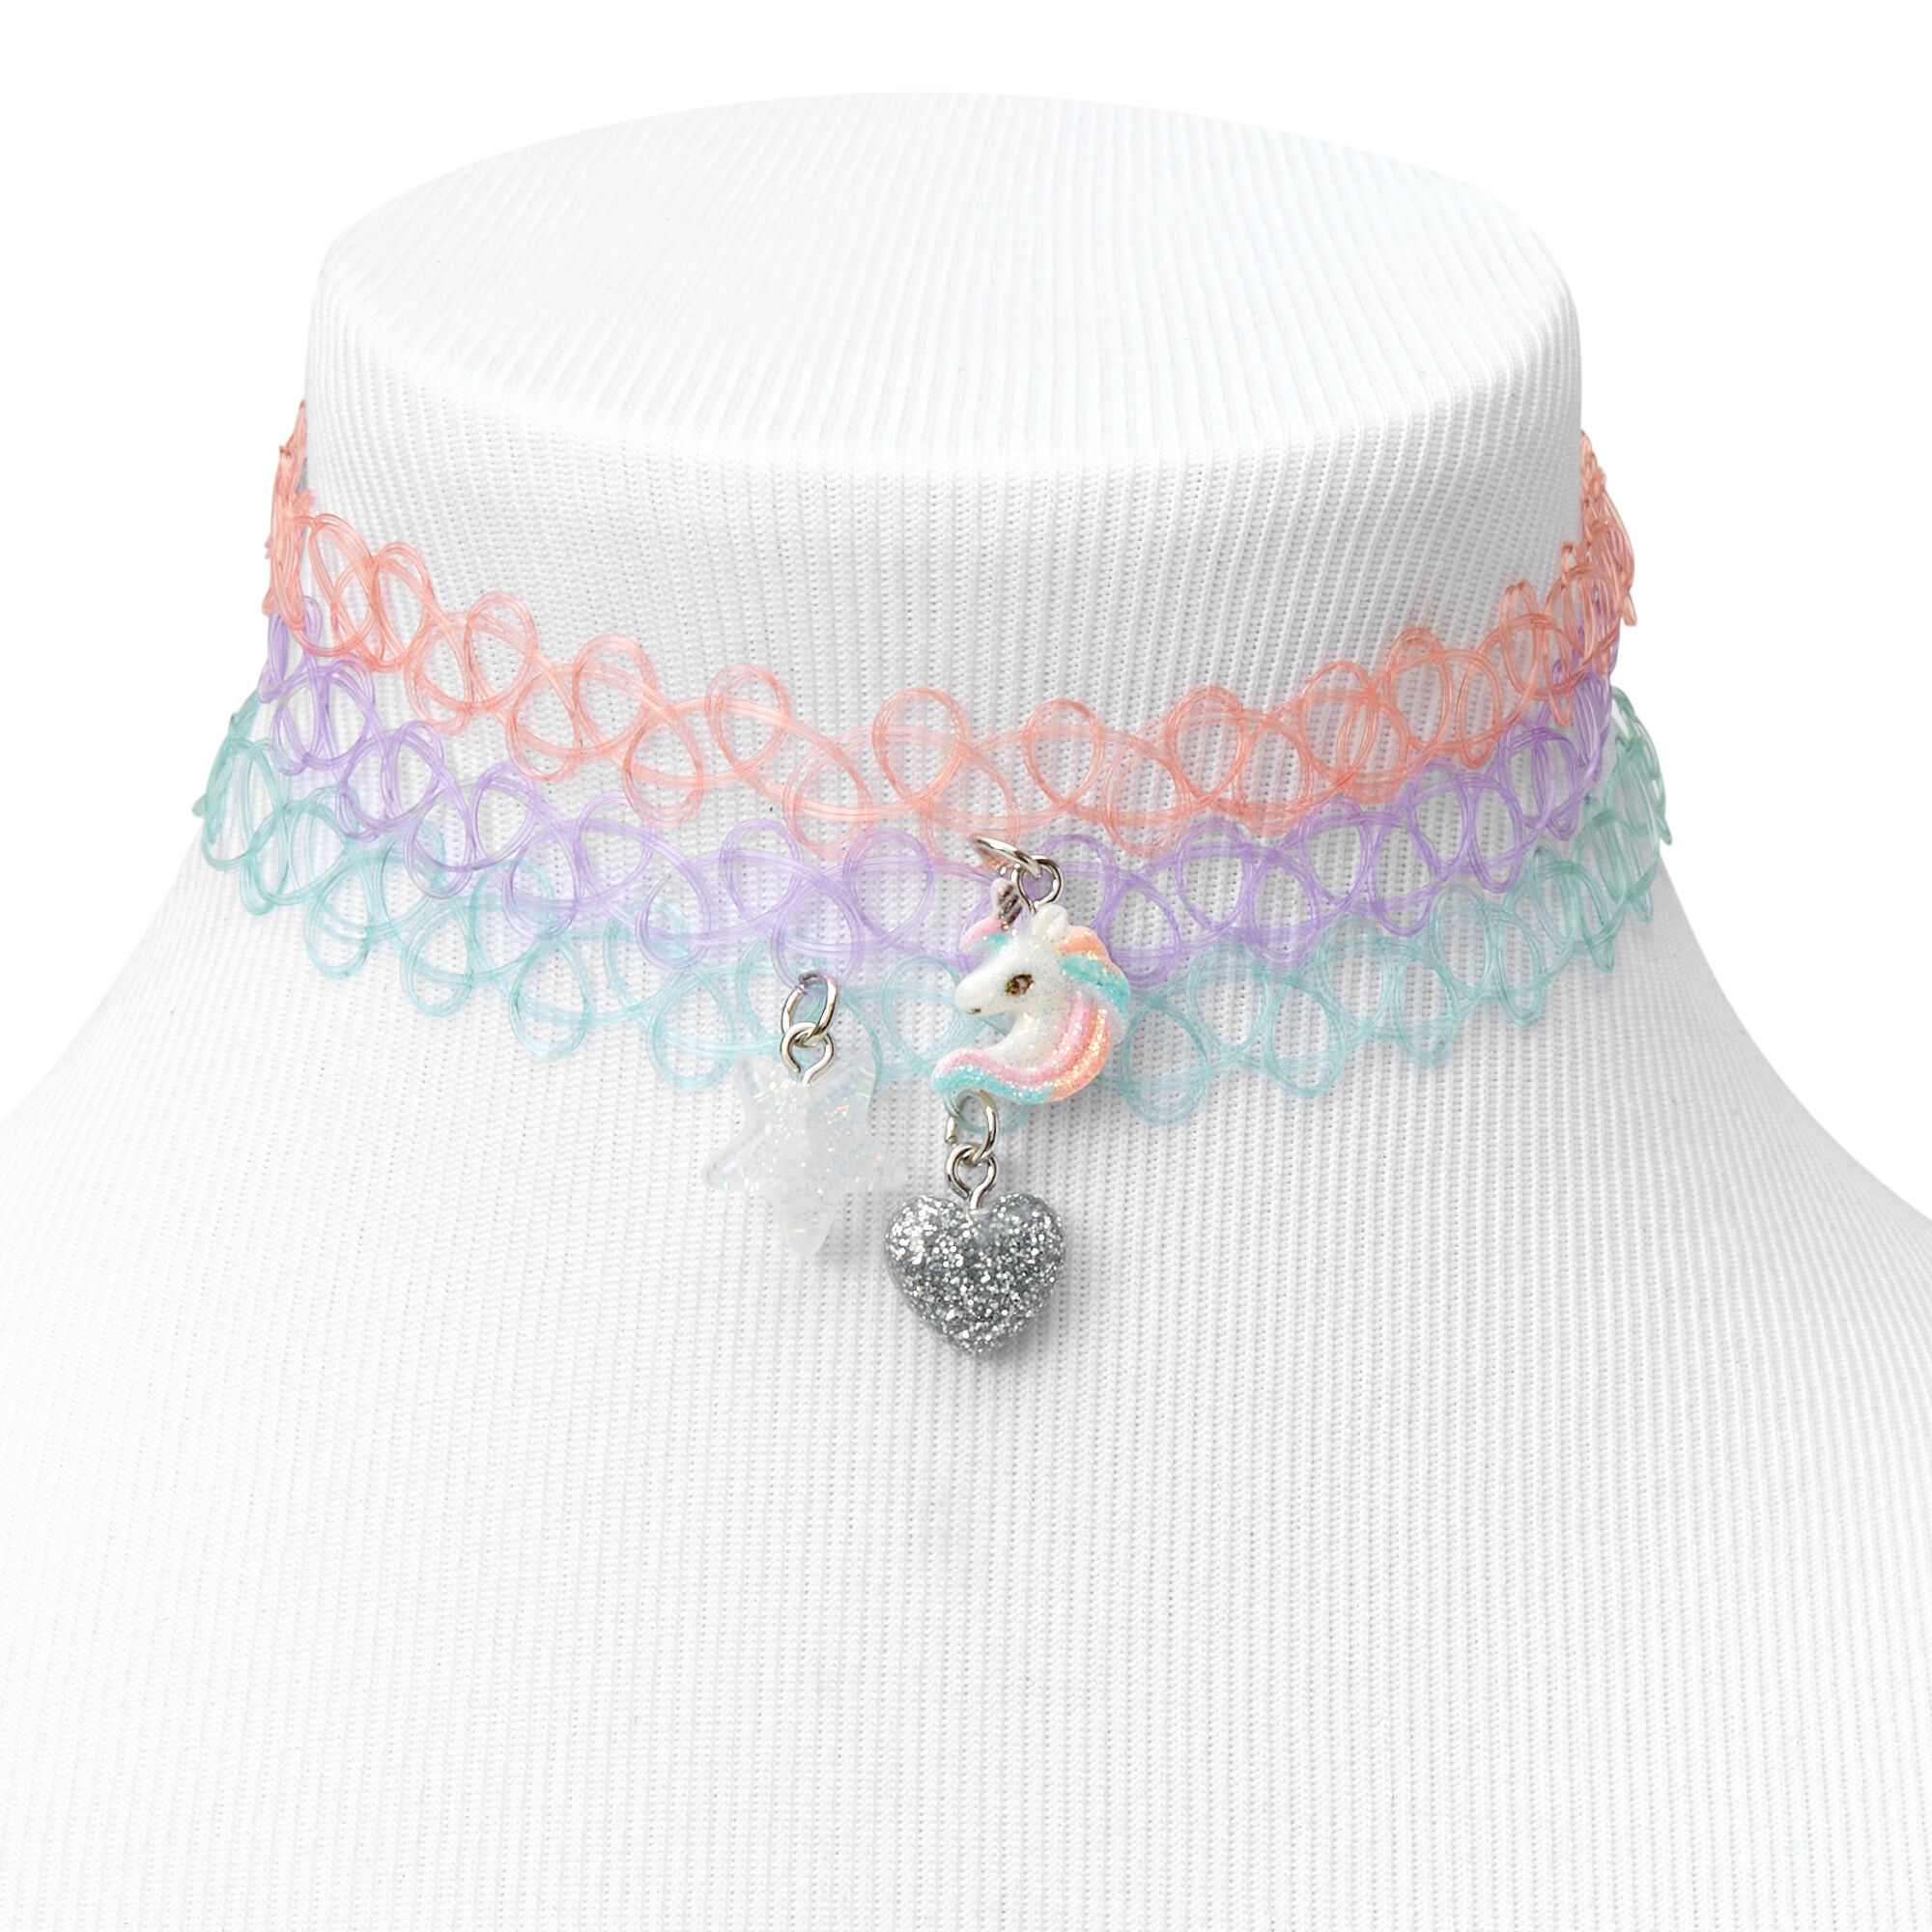 Claire’s mood Color Change stretch Key Tattoo choker necklace jewelry nwt